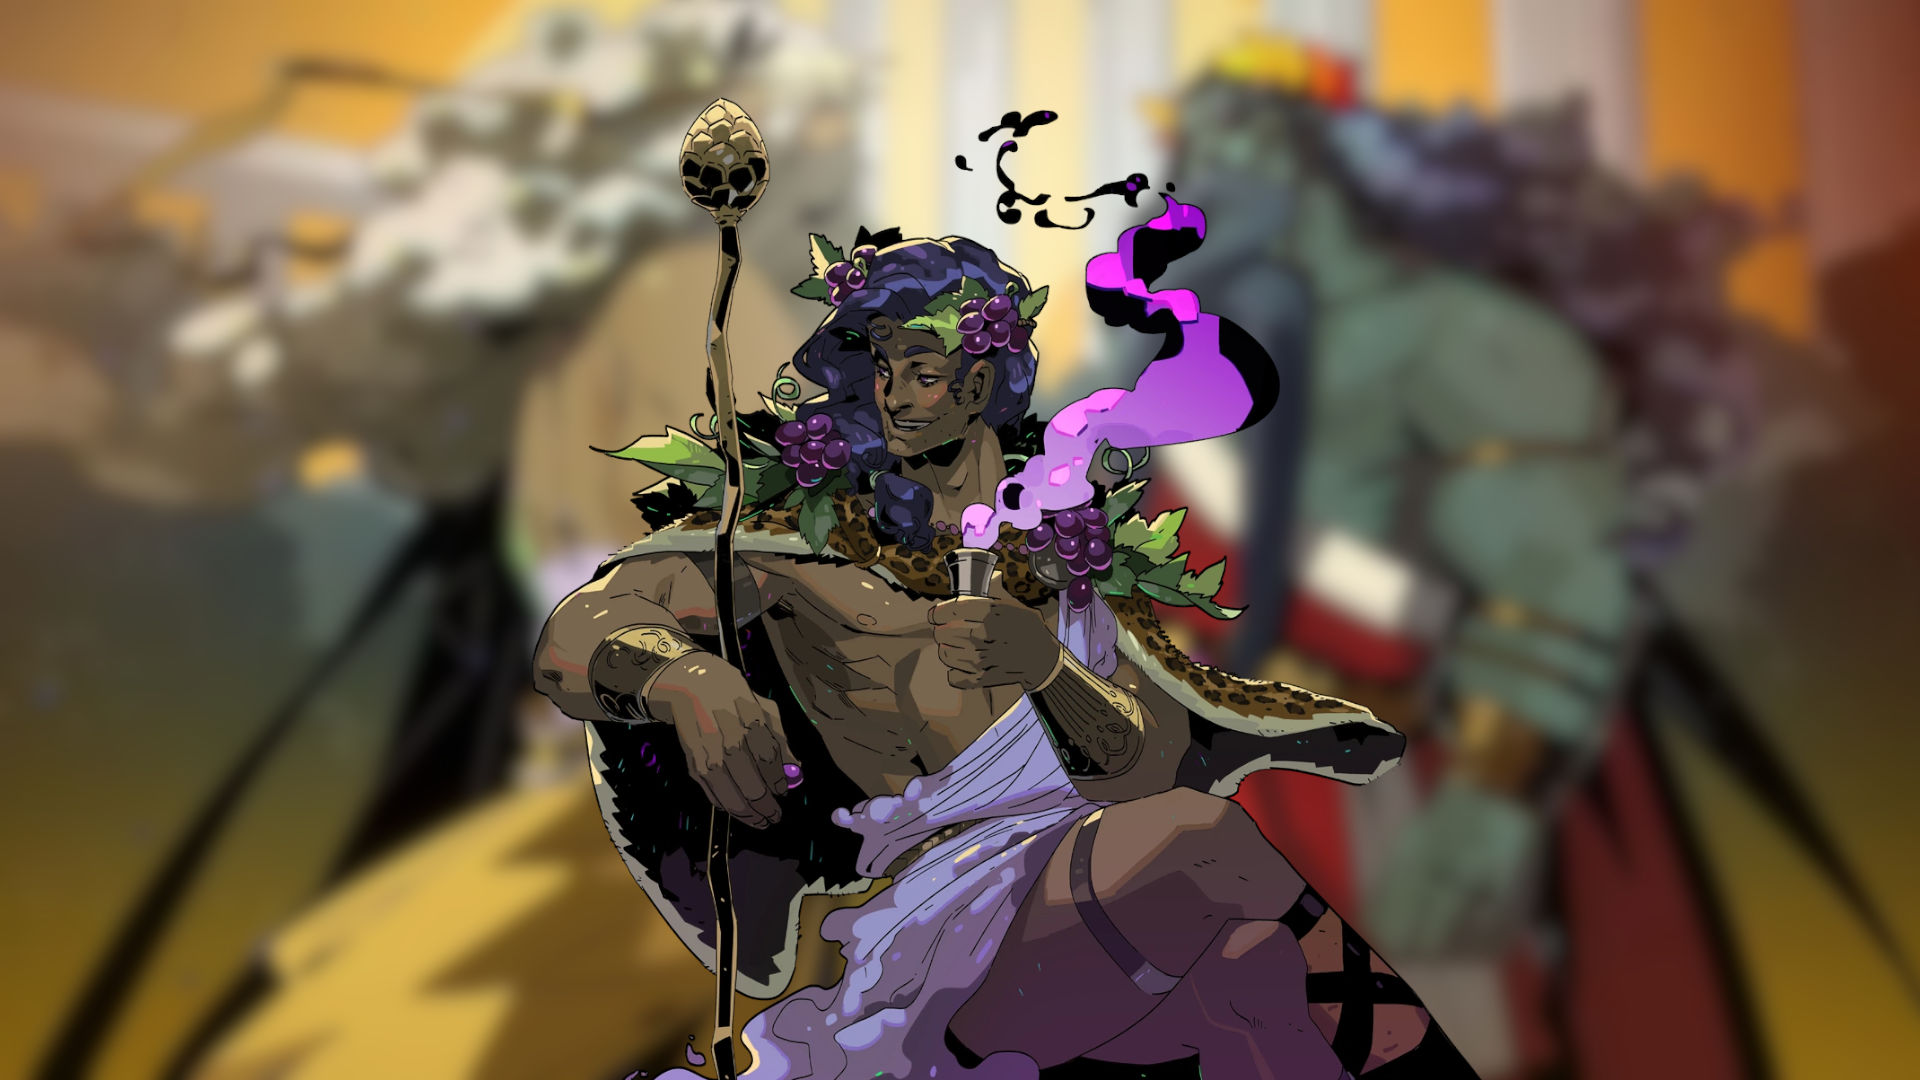 Key art of Dionysus, one of the many Hades characters